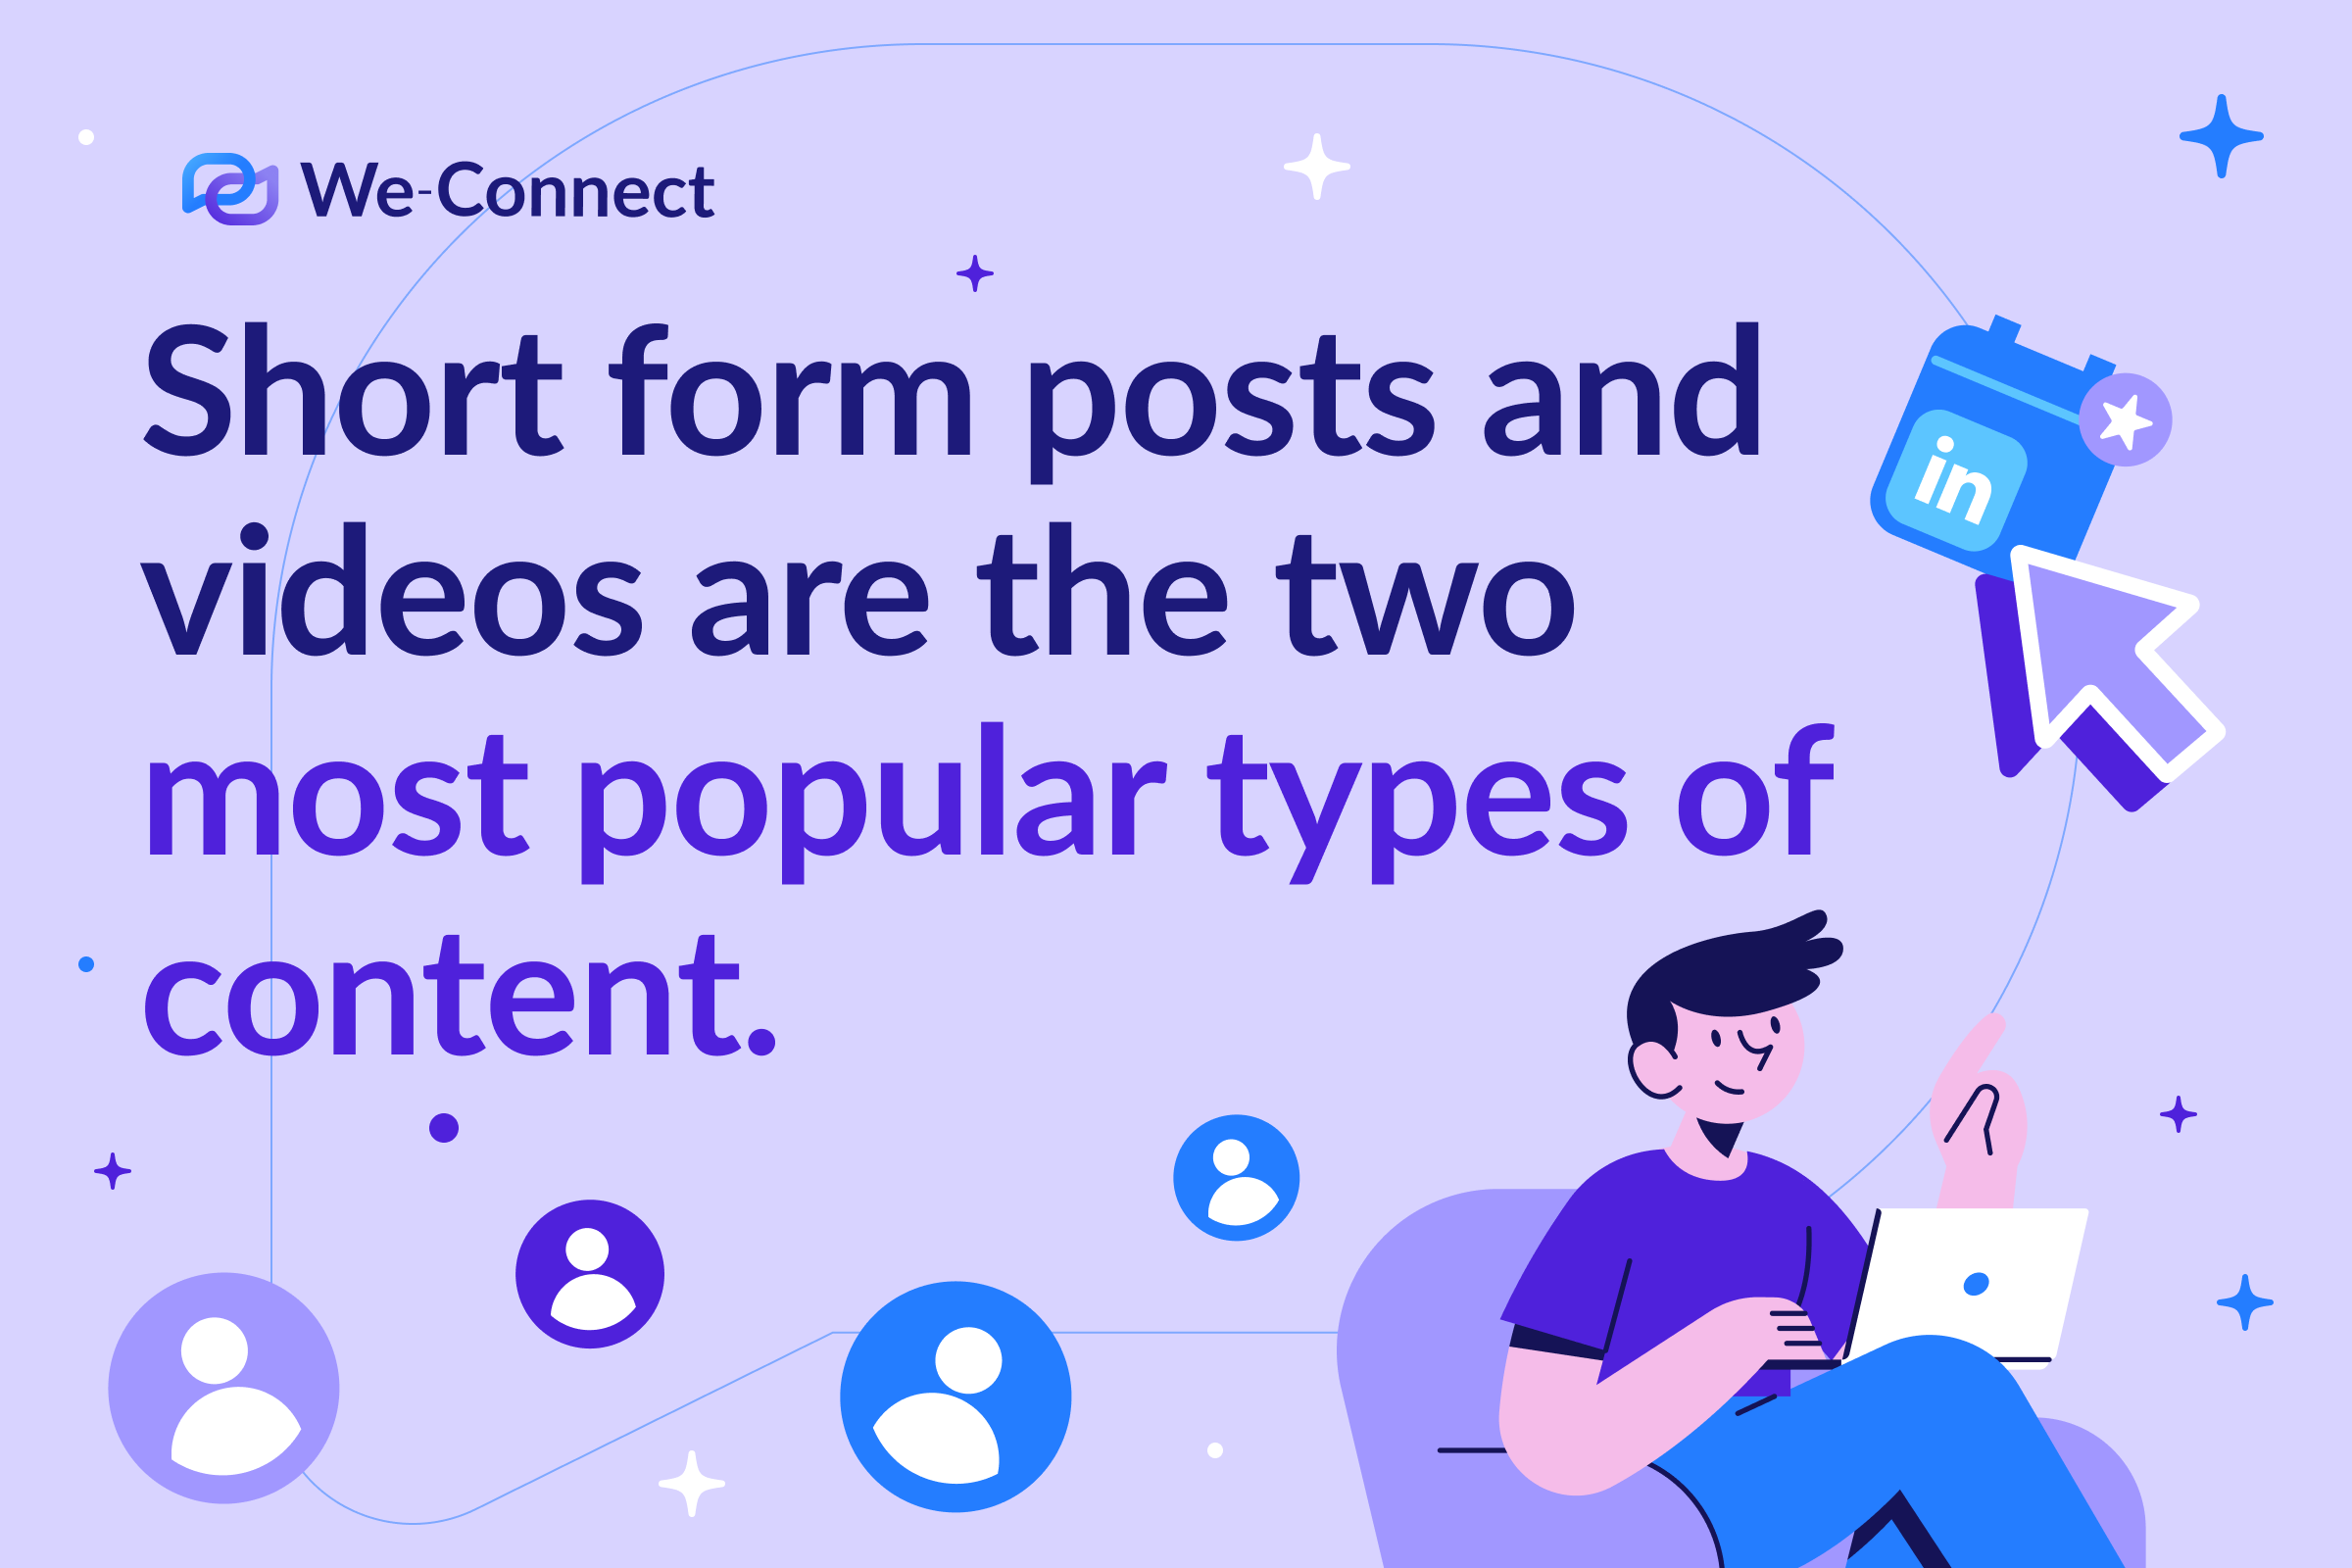 Short form posts and videos are the two most popular types of content